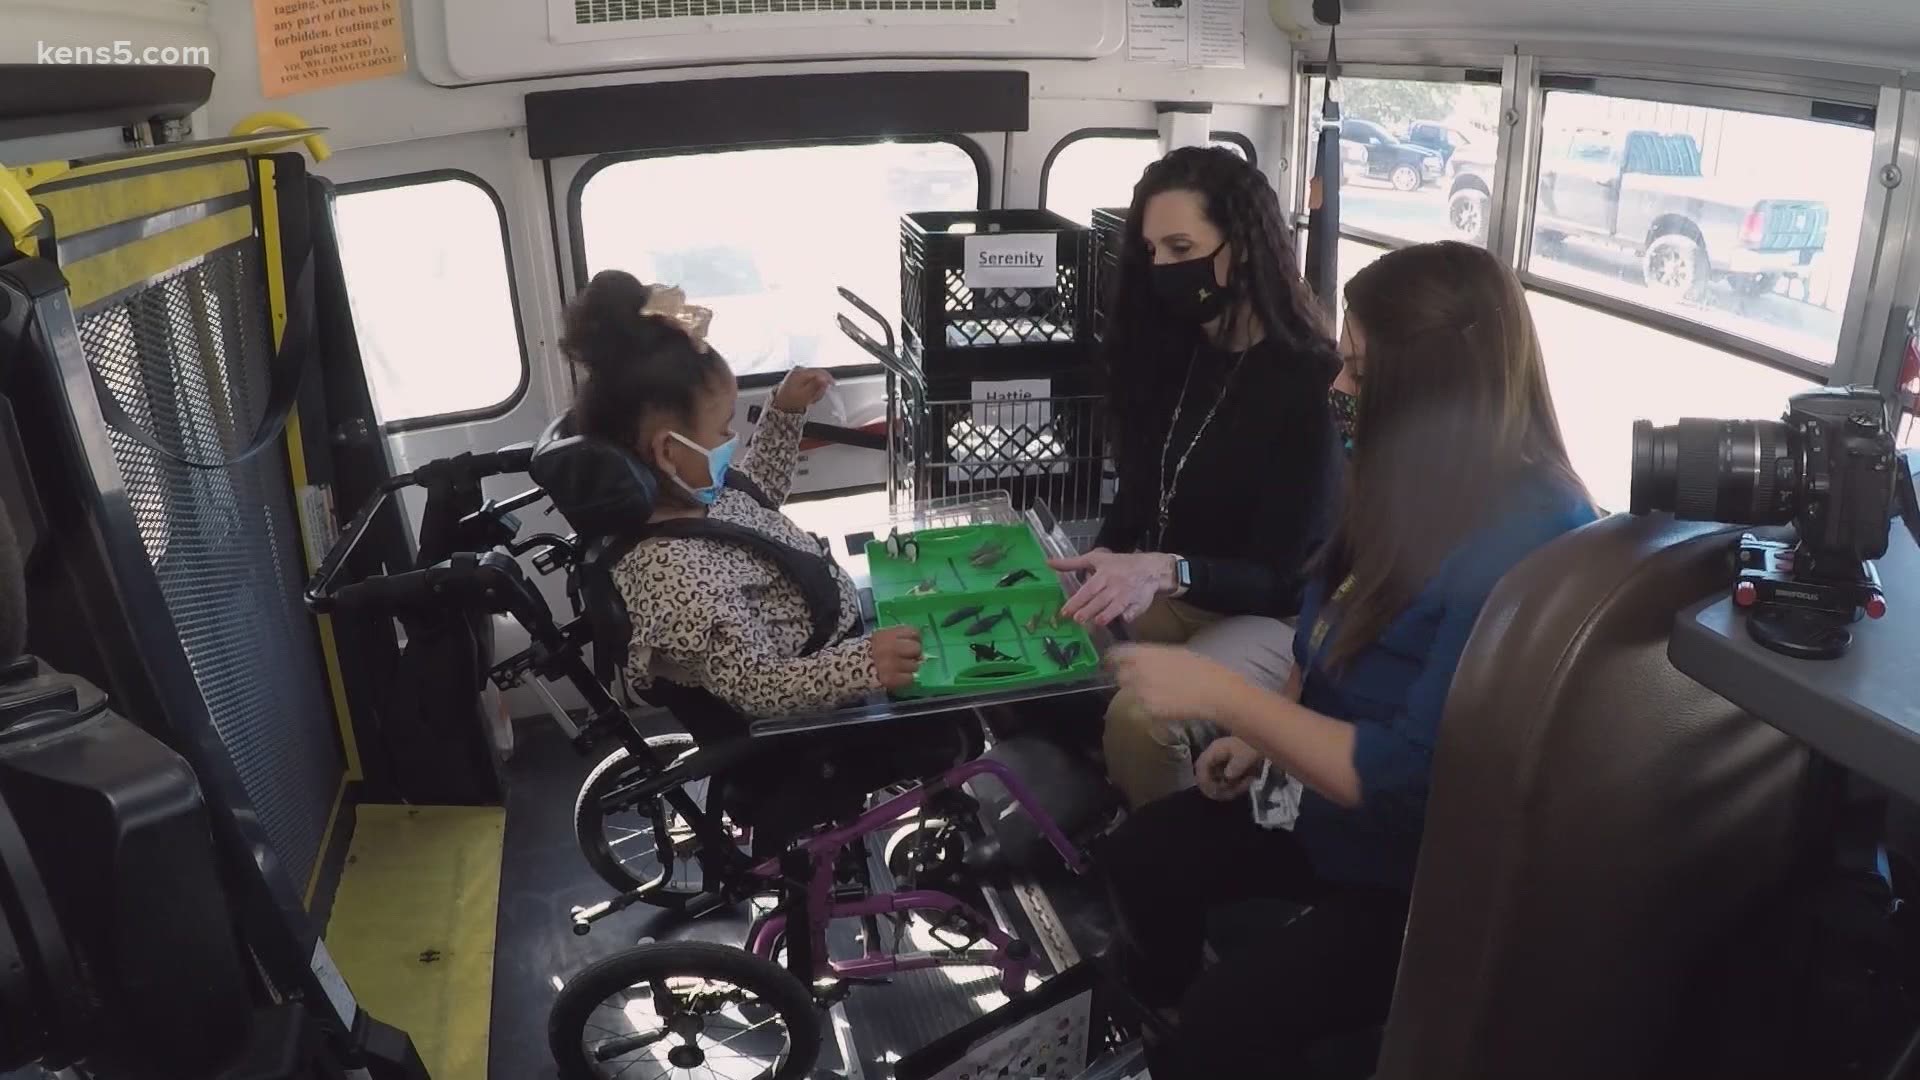 A special education teacher works with students one-on-one in the back of the bus that has been converted into a small classroom, wearing masks of course.